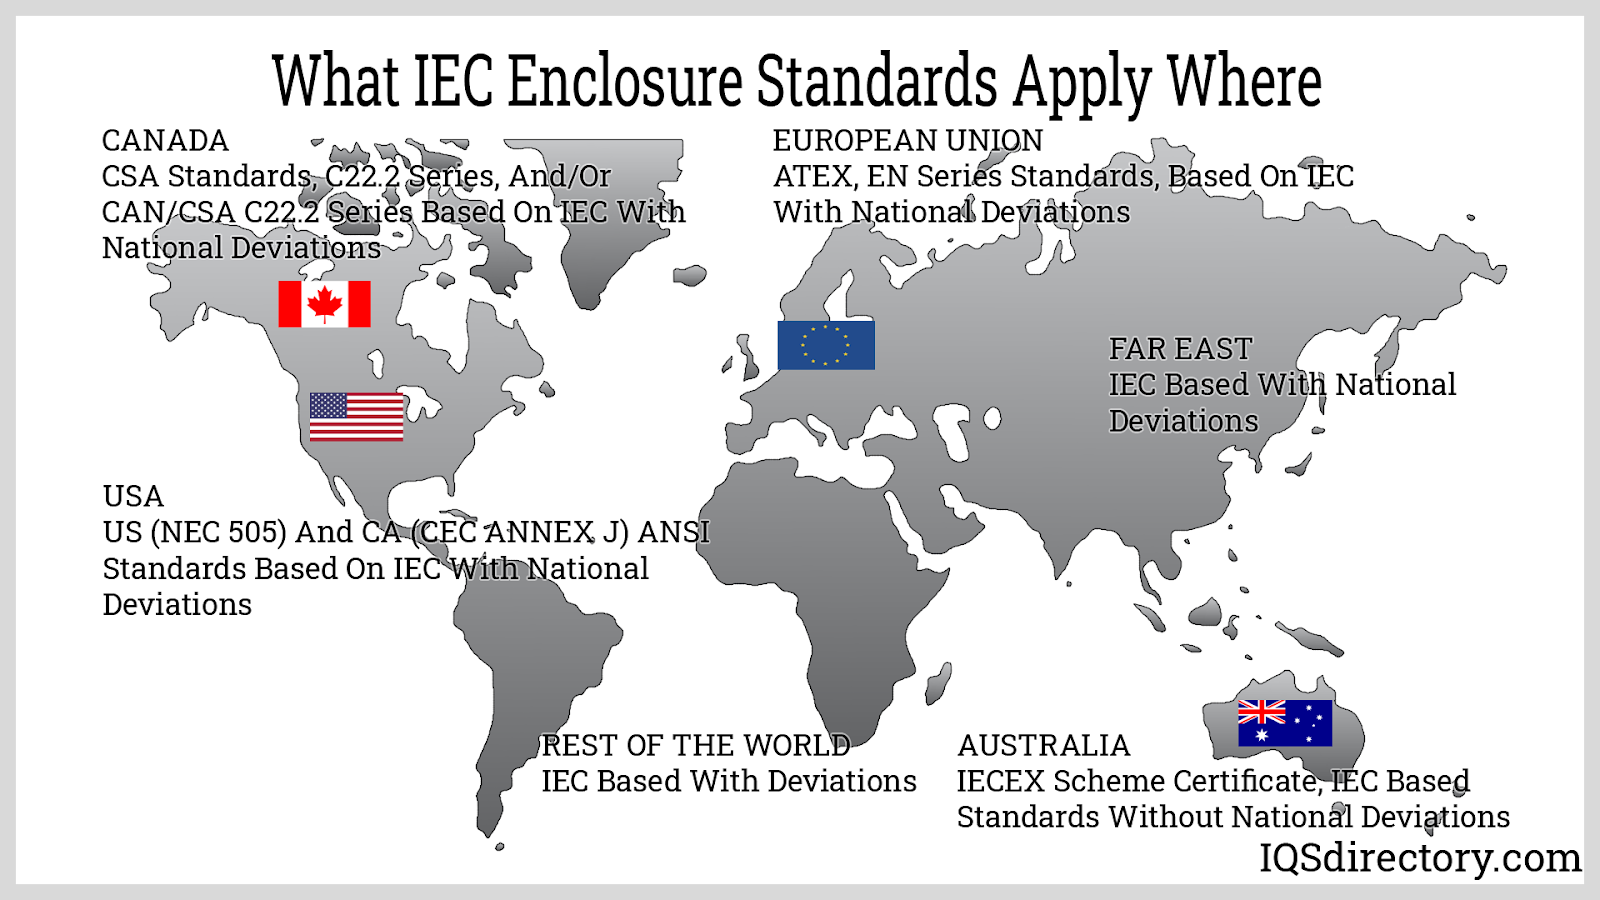 What IEC Enclosure Standards Apply Where